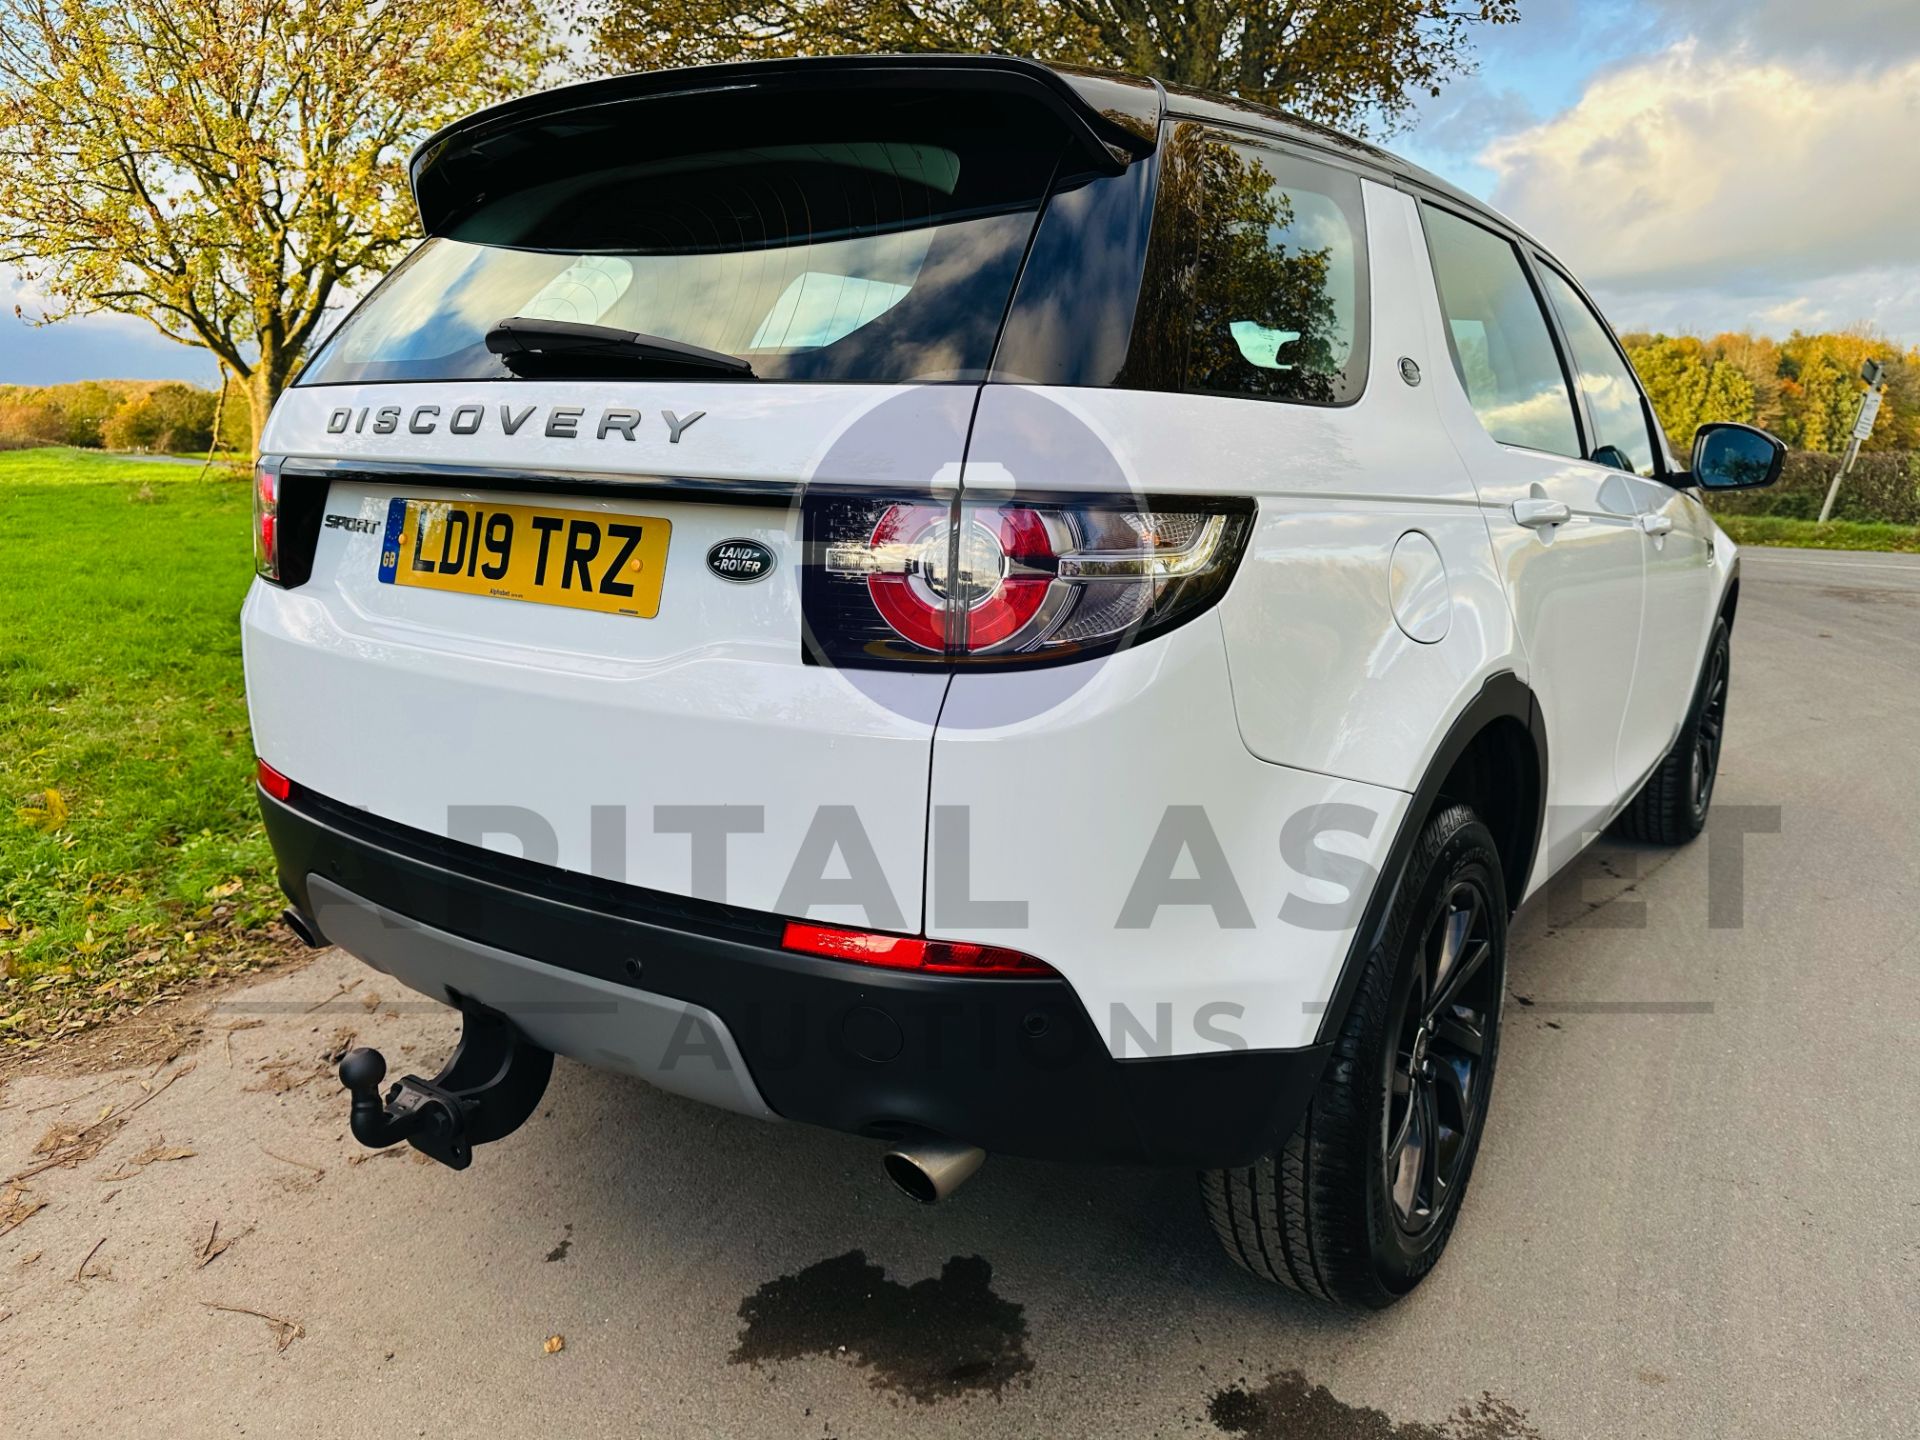 (On Sale) LAND ROVER DISCOVERY SPORT *SE* 5 DOOR SUV (2019 - EURO 6) 2.0 ED4 - AUTO STOP/START - Image 12 of 38